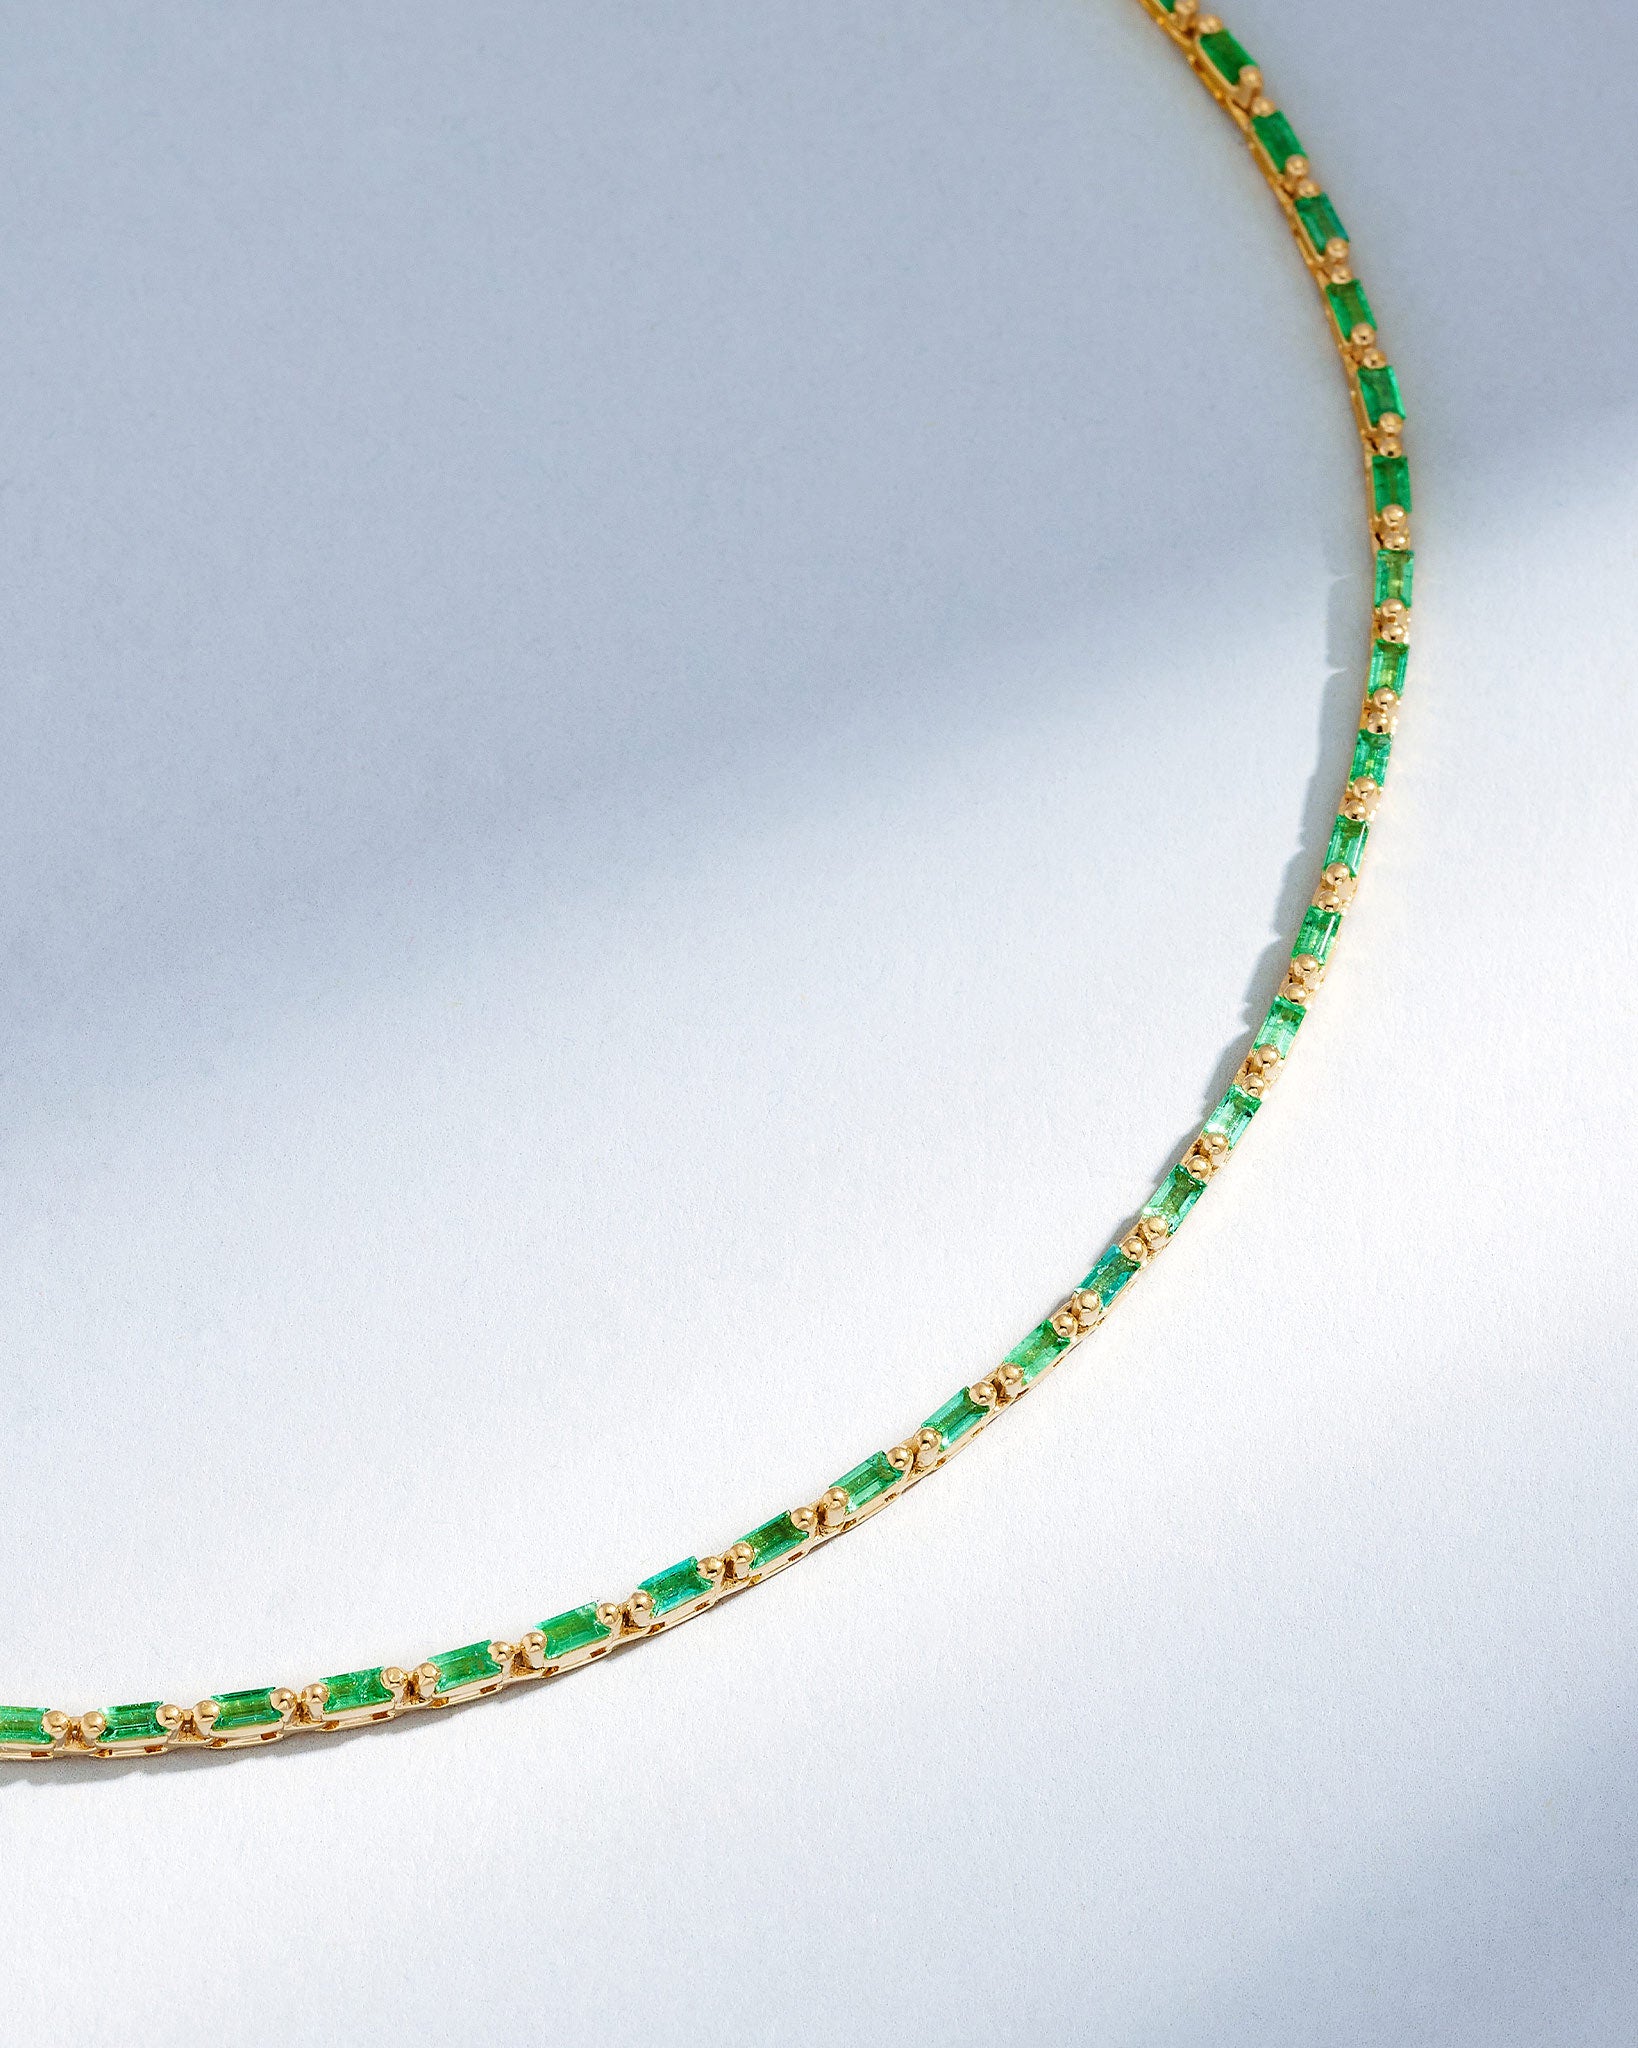 Suzanne Kalan Linear Full Emerald Tennis Necklace in 18k yellow gold